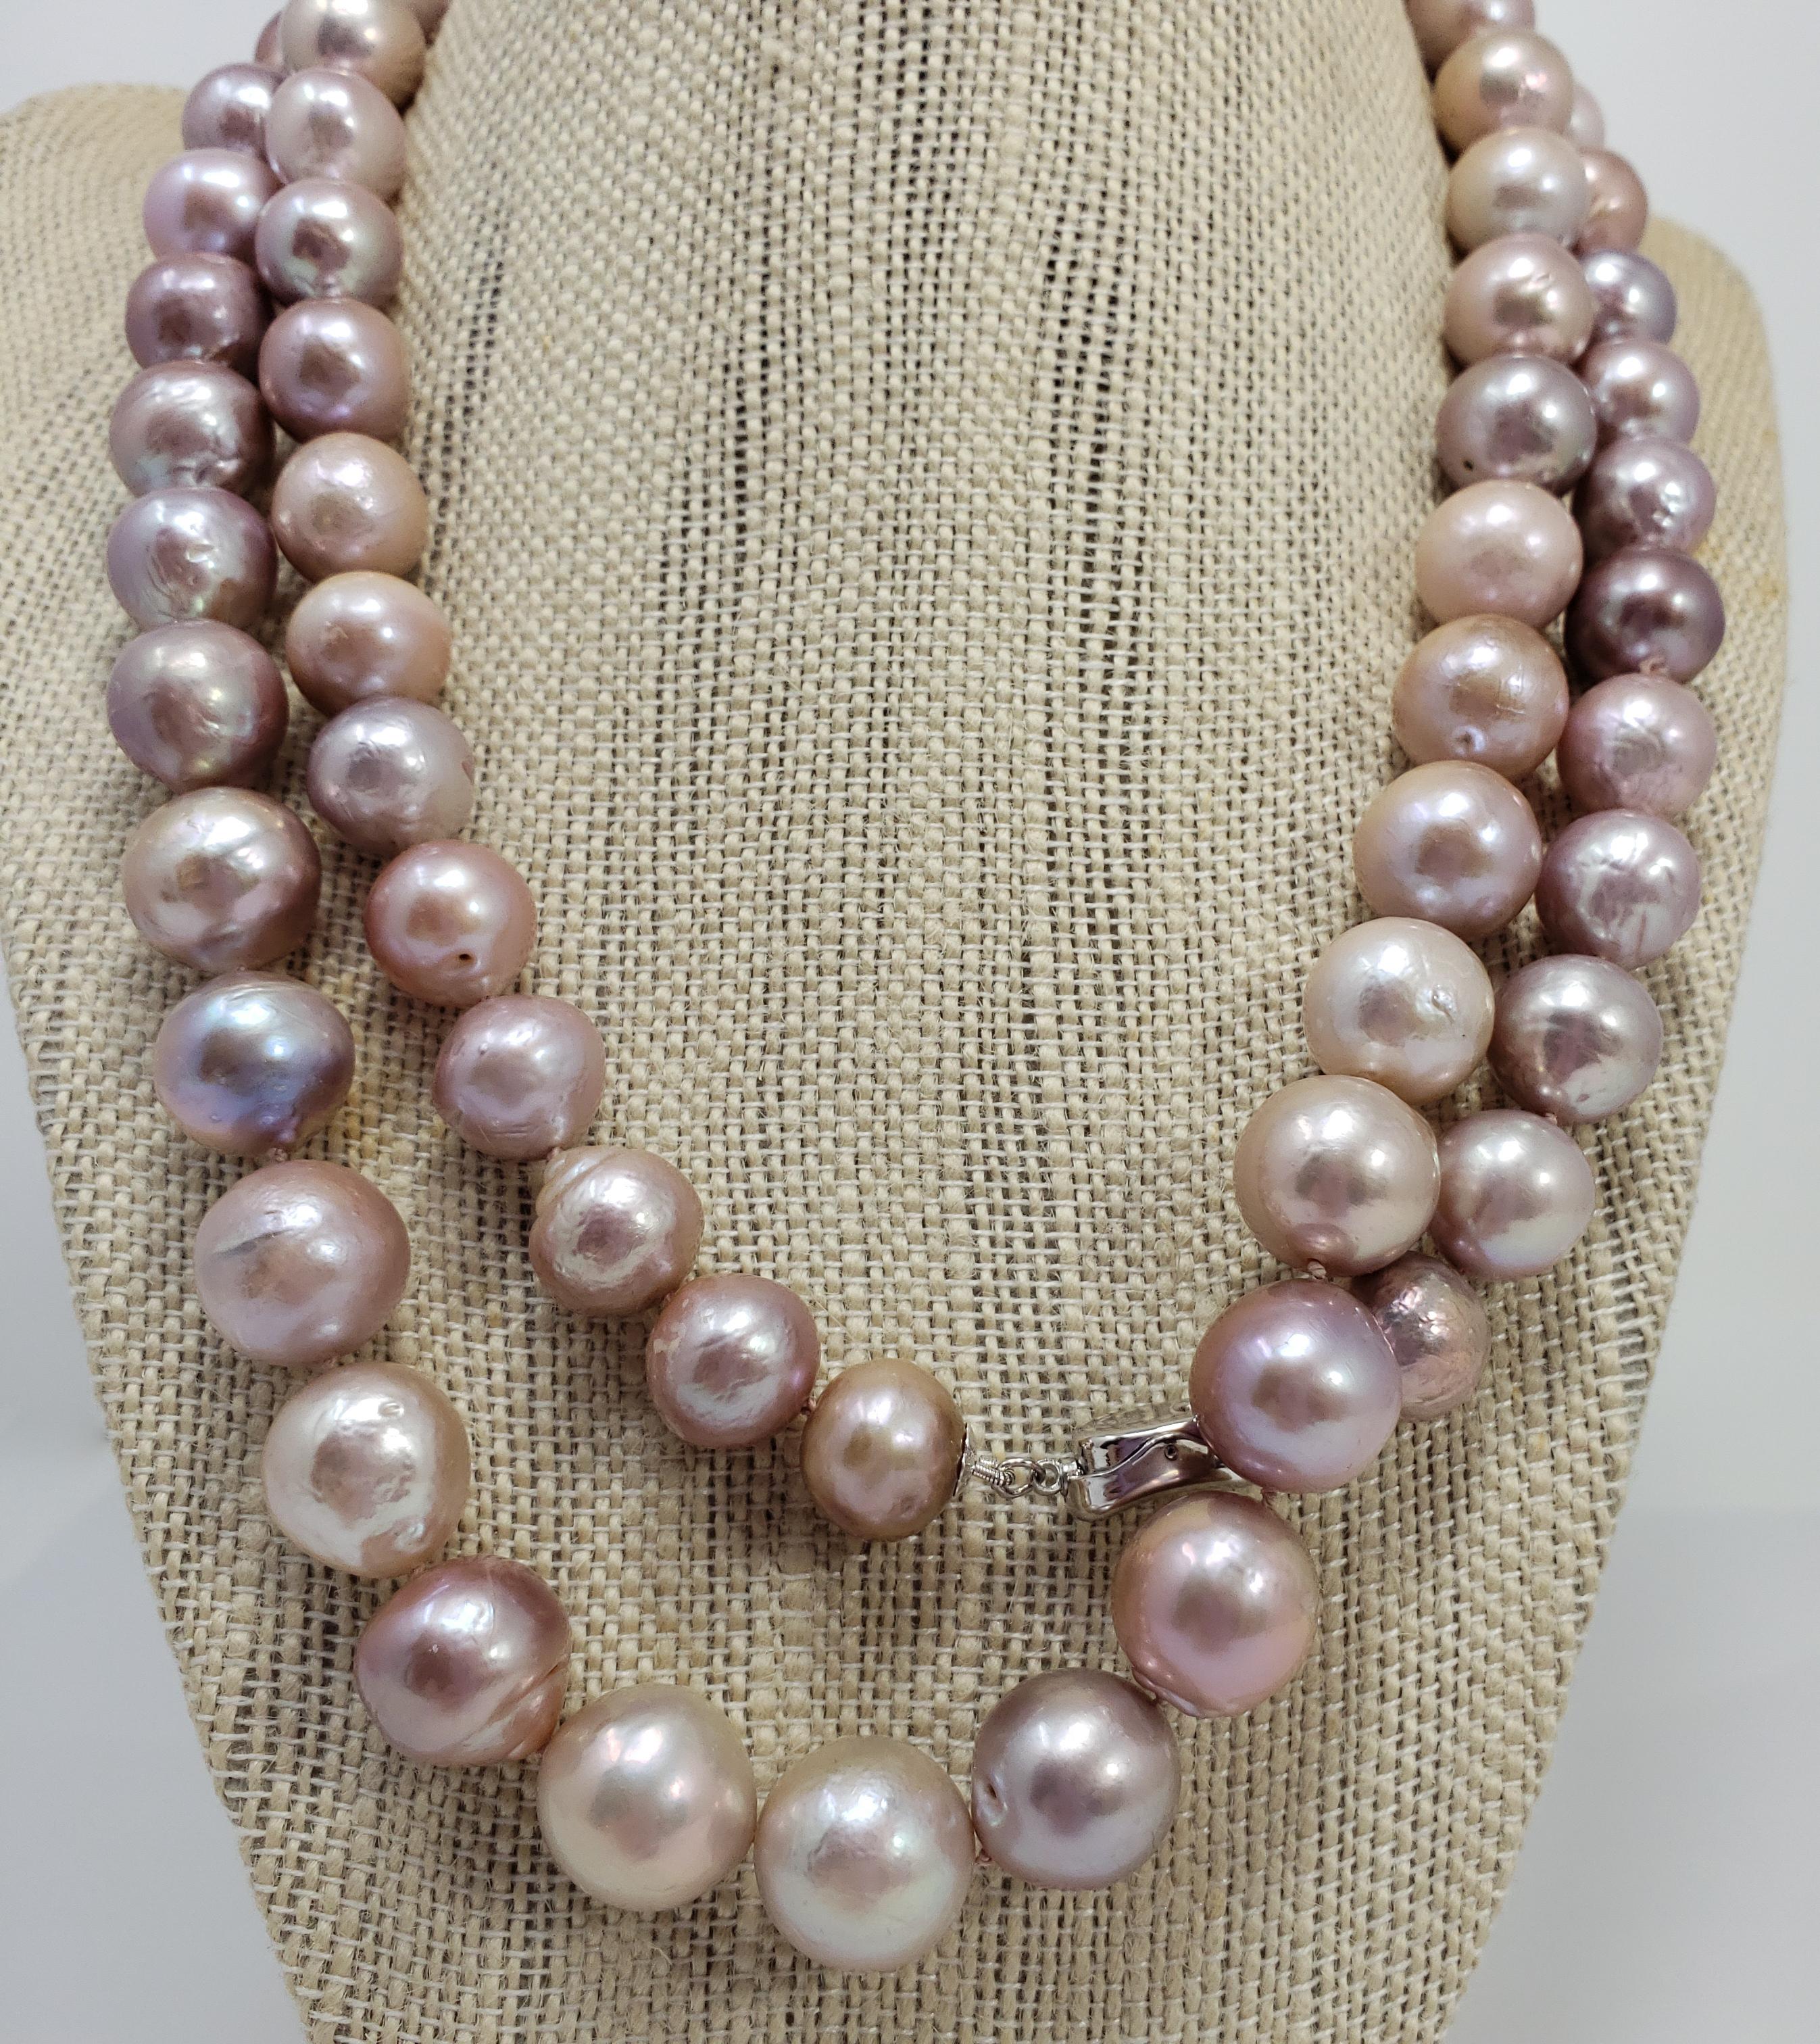 An exquisite strand of South Sea baroque pearls on a sterling silver box clasp. Gorgeous color gradient! The 98 cm length accessory can be worn single or double-stranded. A classy necklace perfect for any style.

Pearls range from 11mm to 14mm in